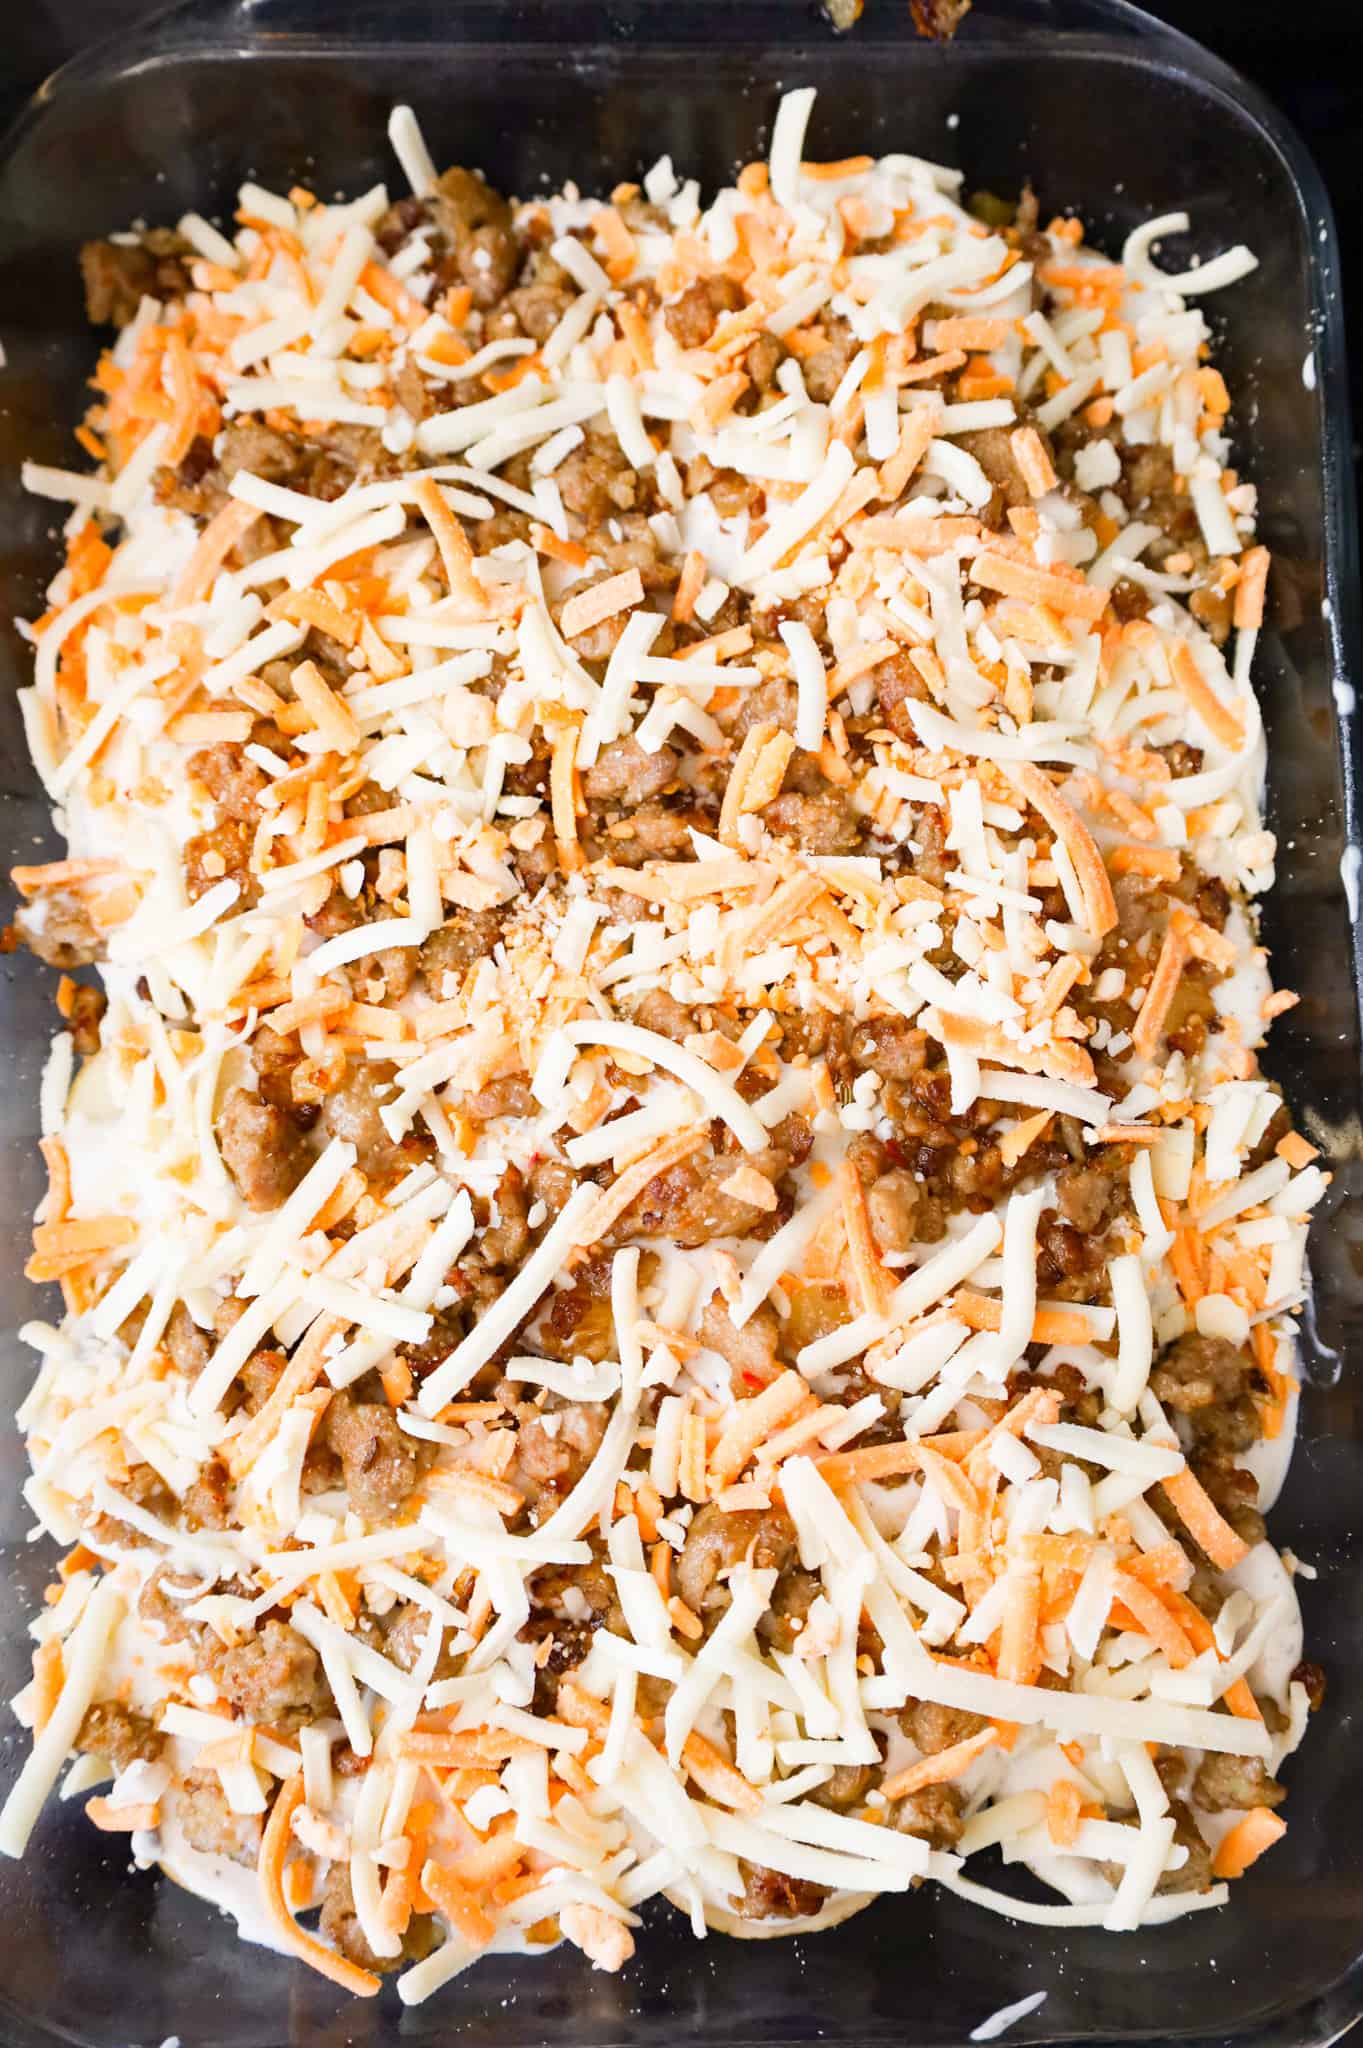 shredded cheese sprinkled over crumbled sausage and soup mixture in casserole dish